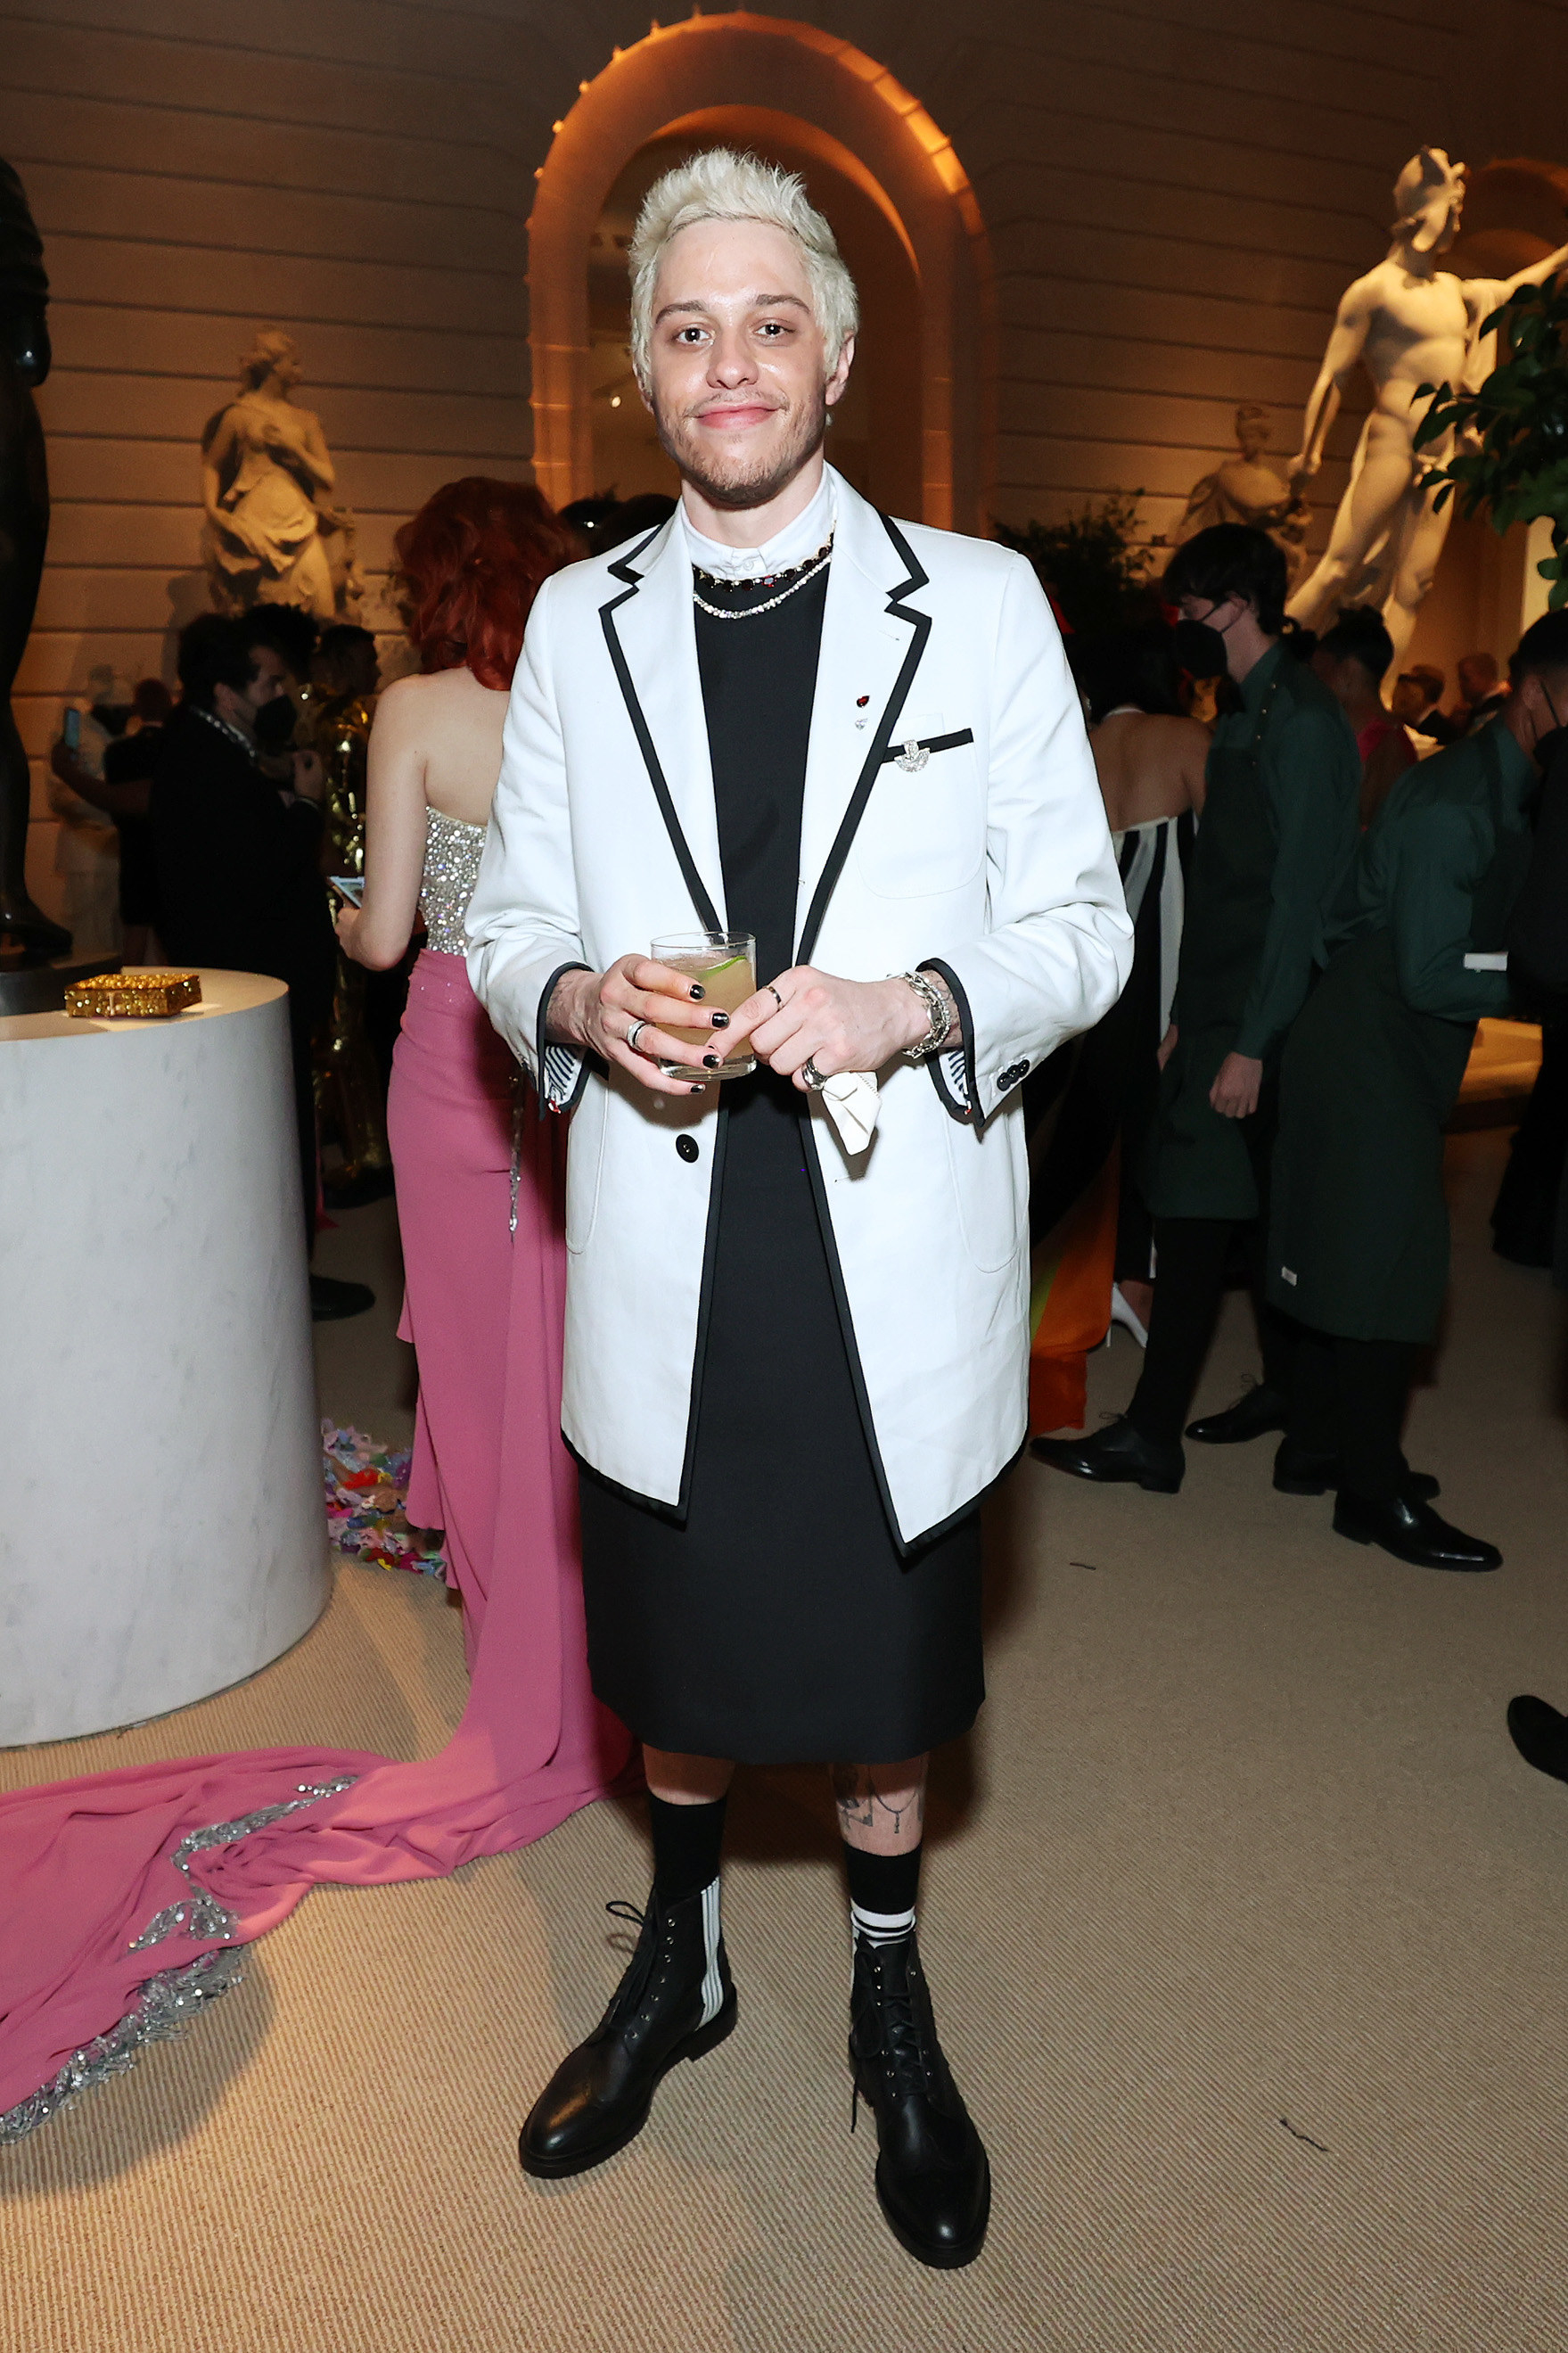 Pete at the Met Gala wearing a long blazer and skirt with ankle-length boots